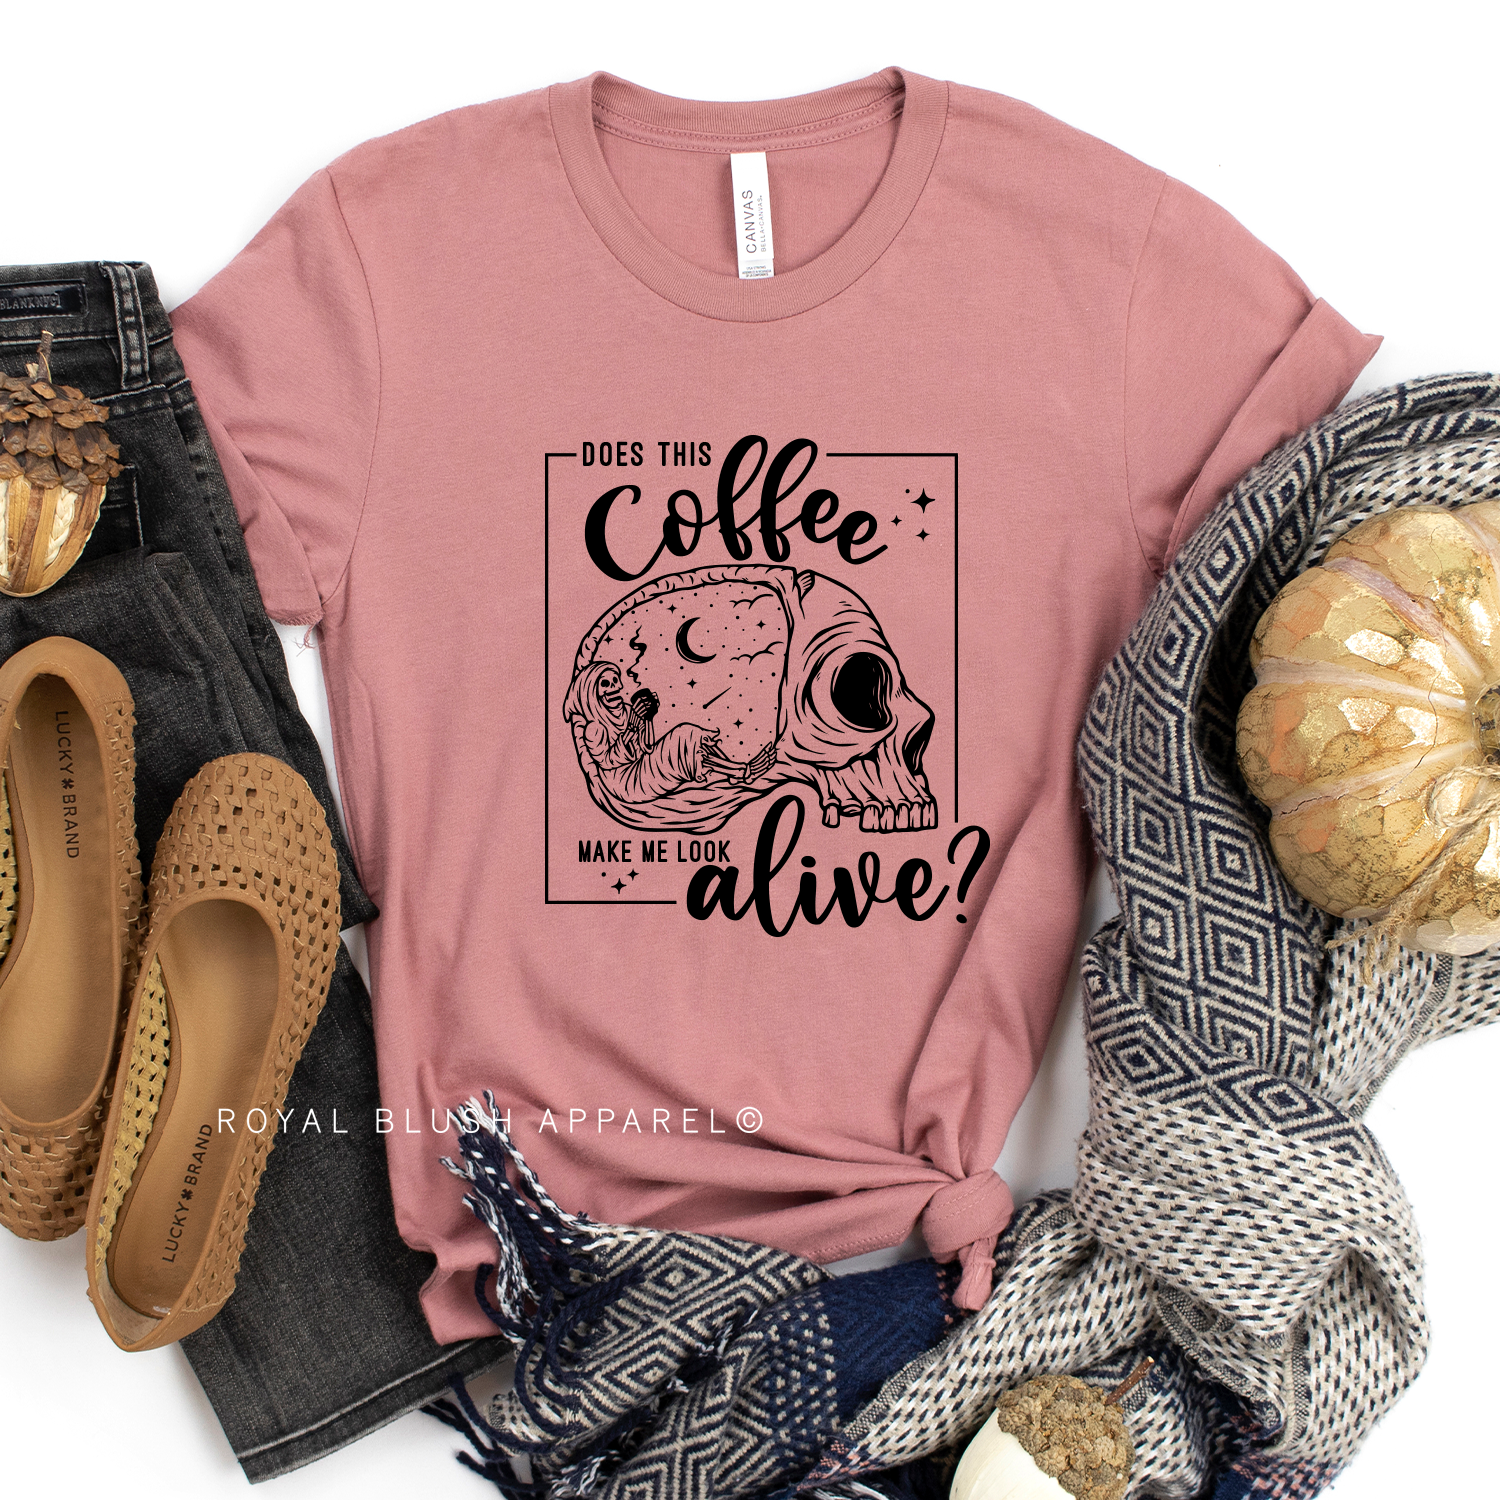 Does This Coffee Make Me Look Alive? Relaxed Unisex T-shirt